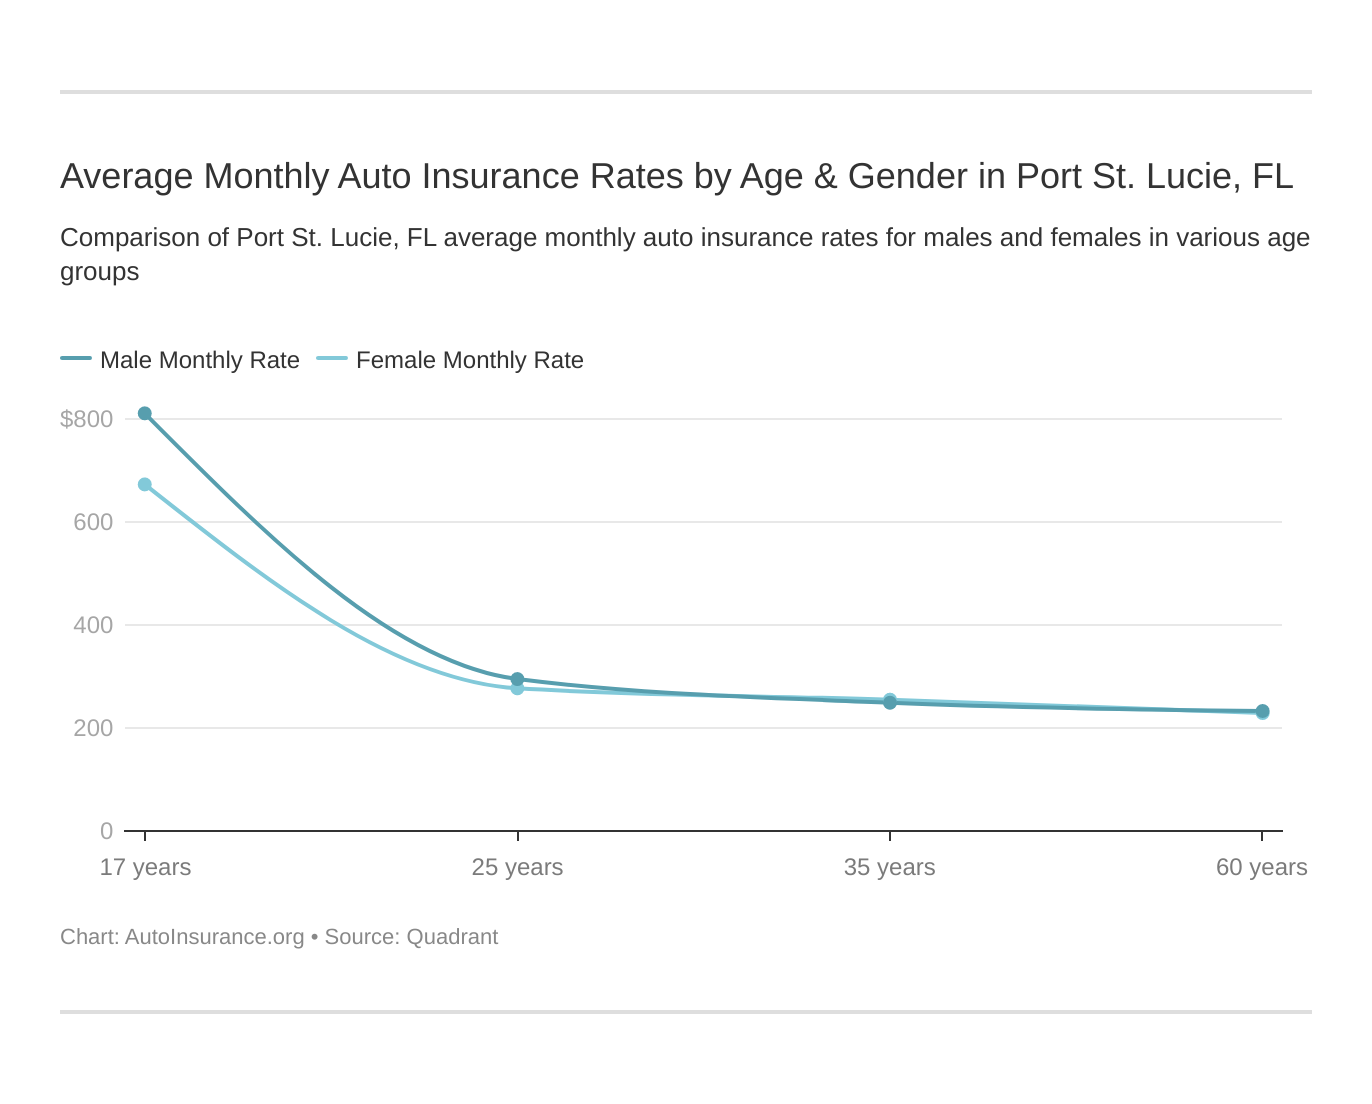 Average Monthly Auto Insurance Rates by Age & Gender in Port St. Lucie, FL